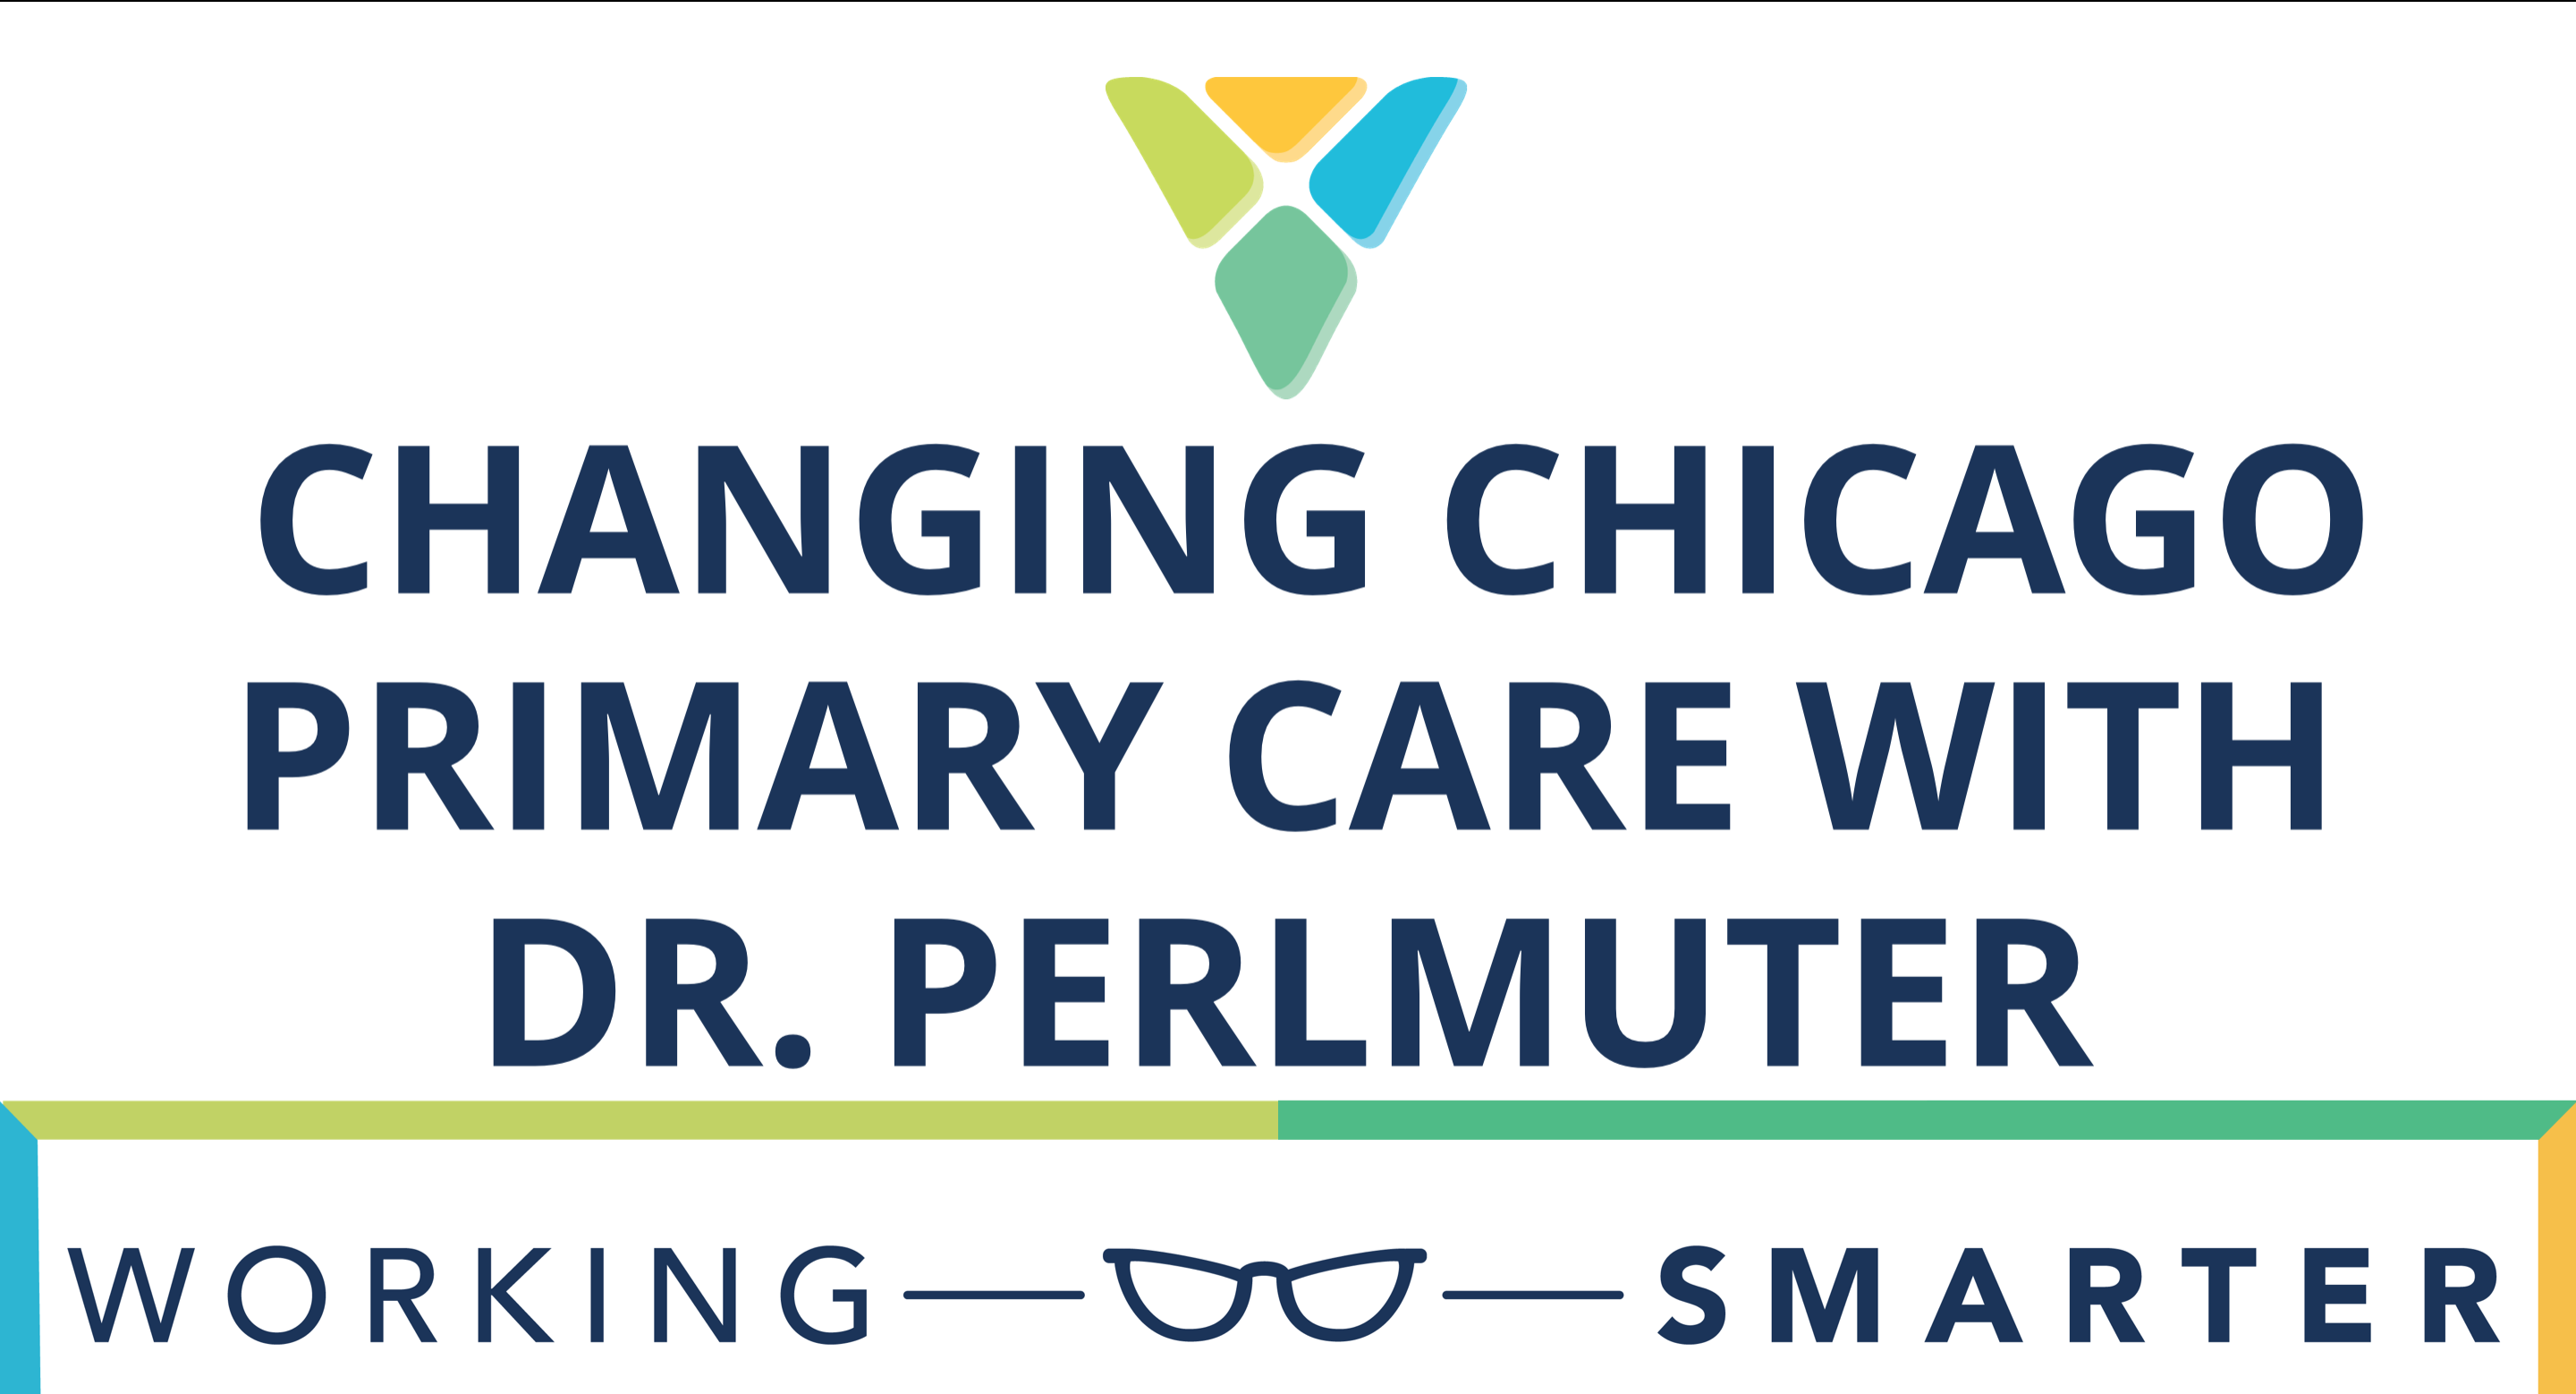 Working Smarter Around the Village Changing Chicago Primary Care